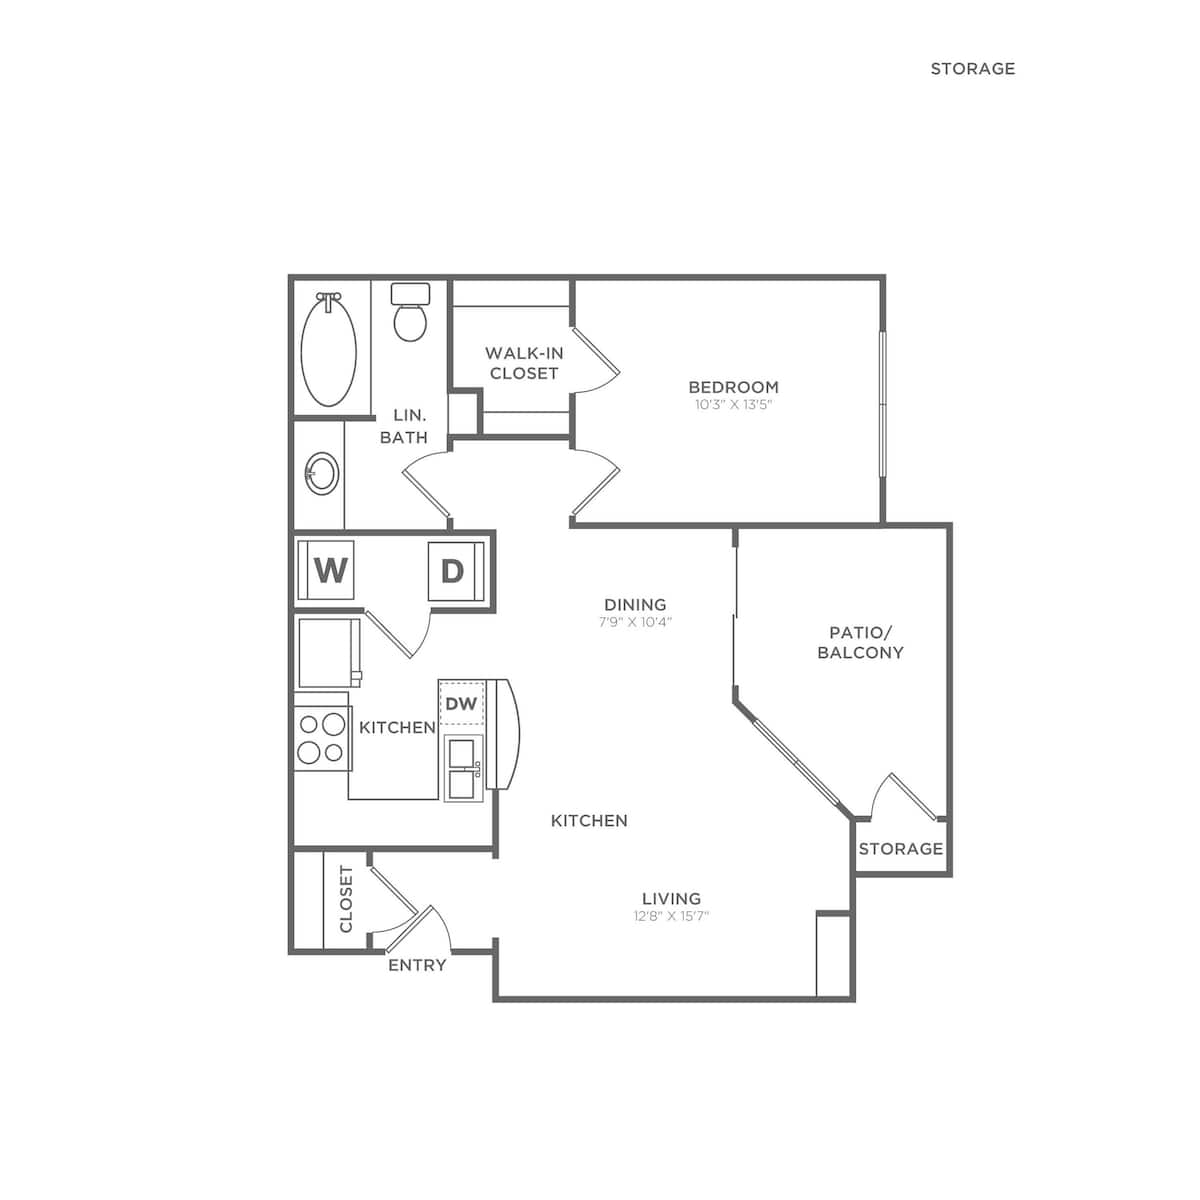 Floorplan diagram for A1-Classic, showing 1 bedroom